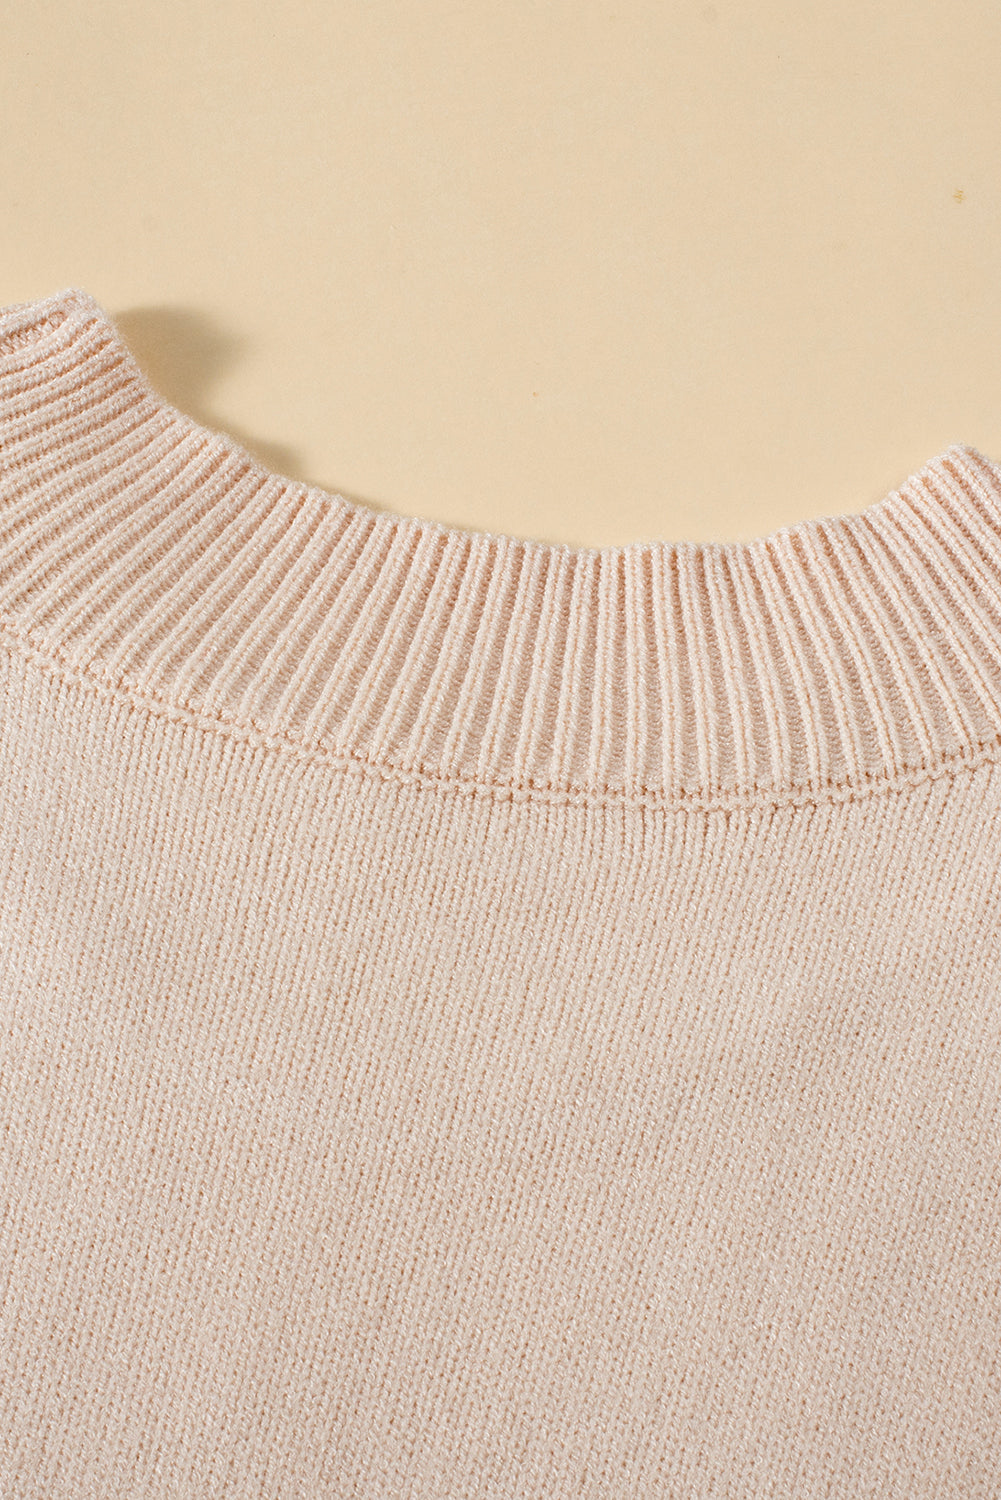 Oatmeal Plus Cable Knit Short Ruffled Sleeve Mock Neck Sweater